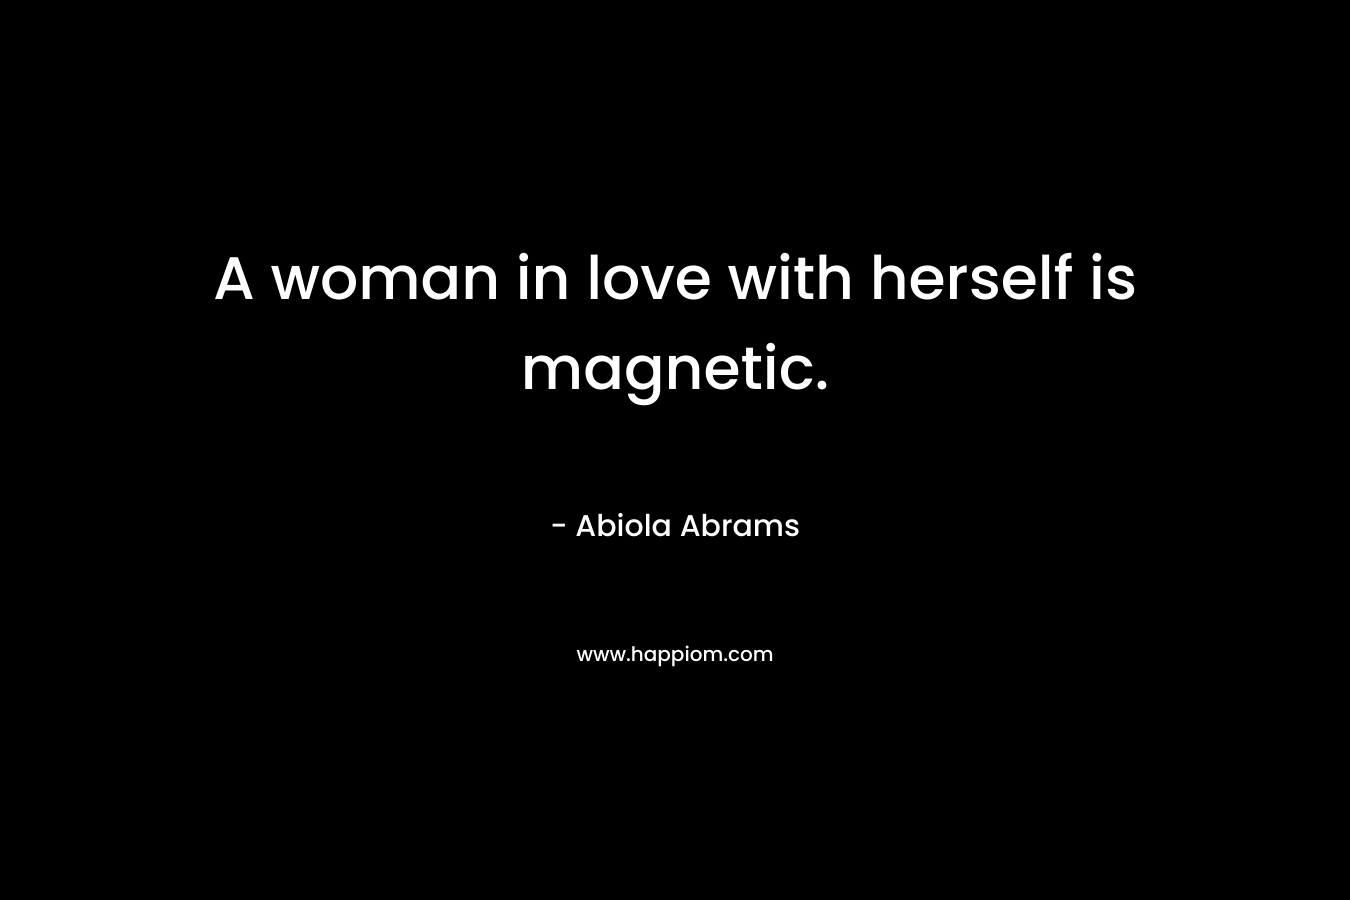 A woman in love with herself is magnetic. – Abiola Abrams